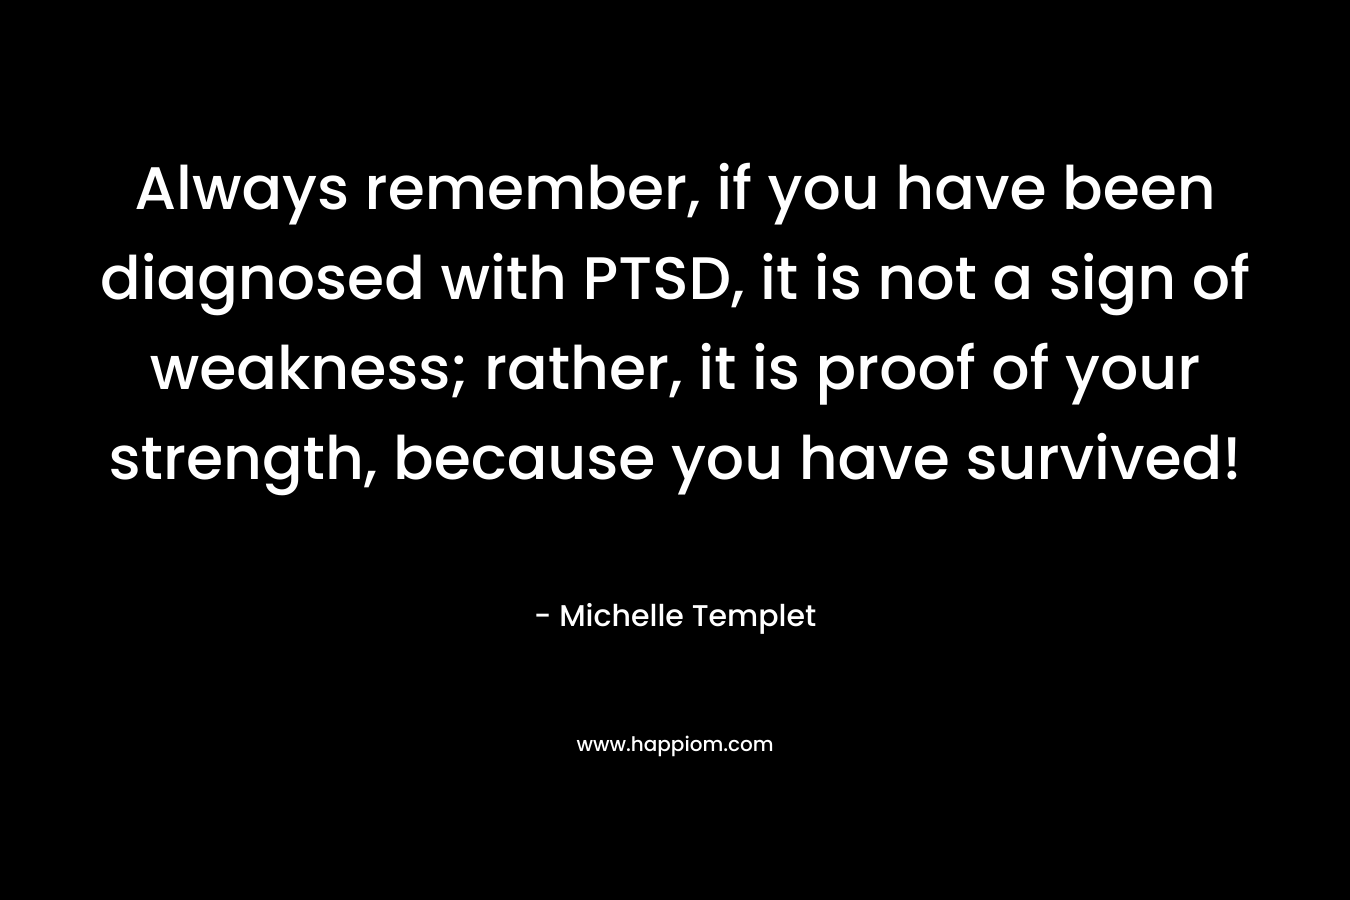 Always remember, if you have been diagnosed with PTSD, it is not a sign of weakness; rather, it is proof of your strength, because you have survived! – Michelle Templet